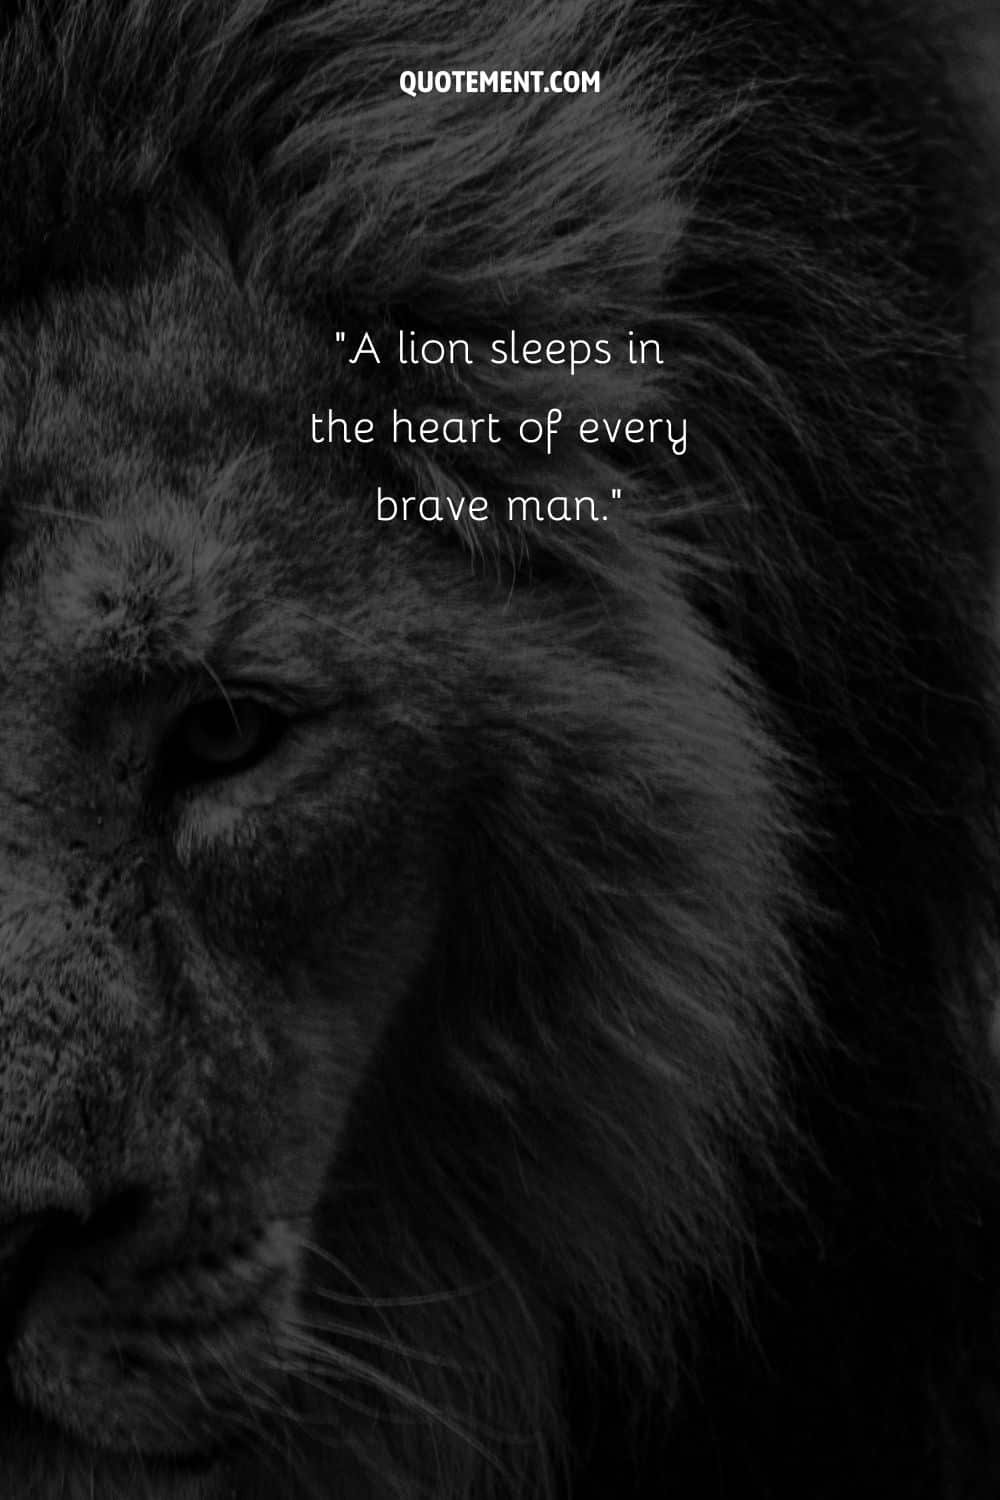 image of lion's head representing the best lion quote